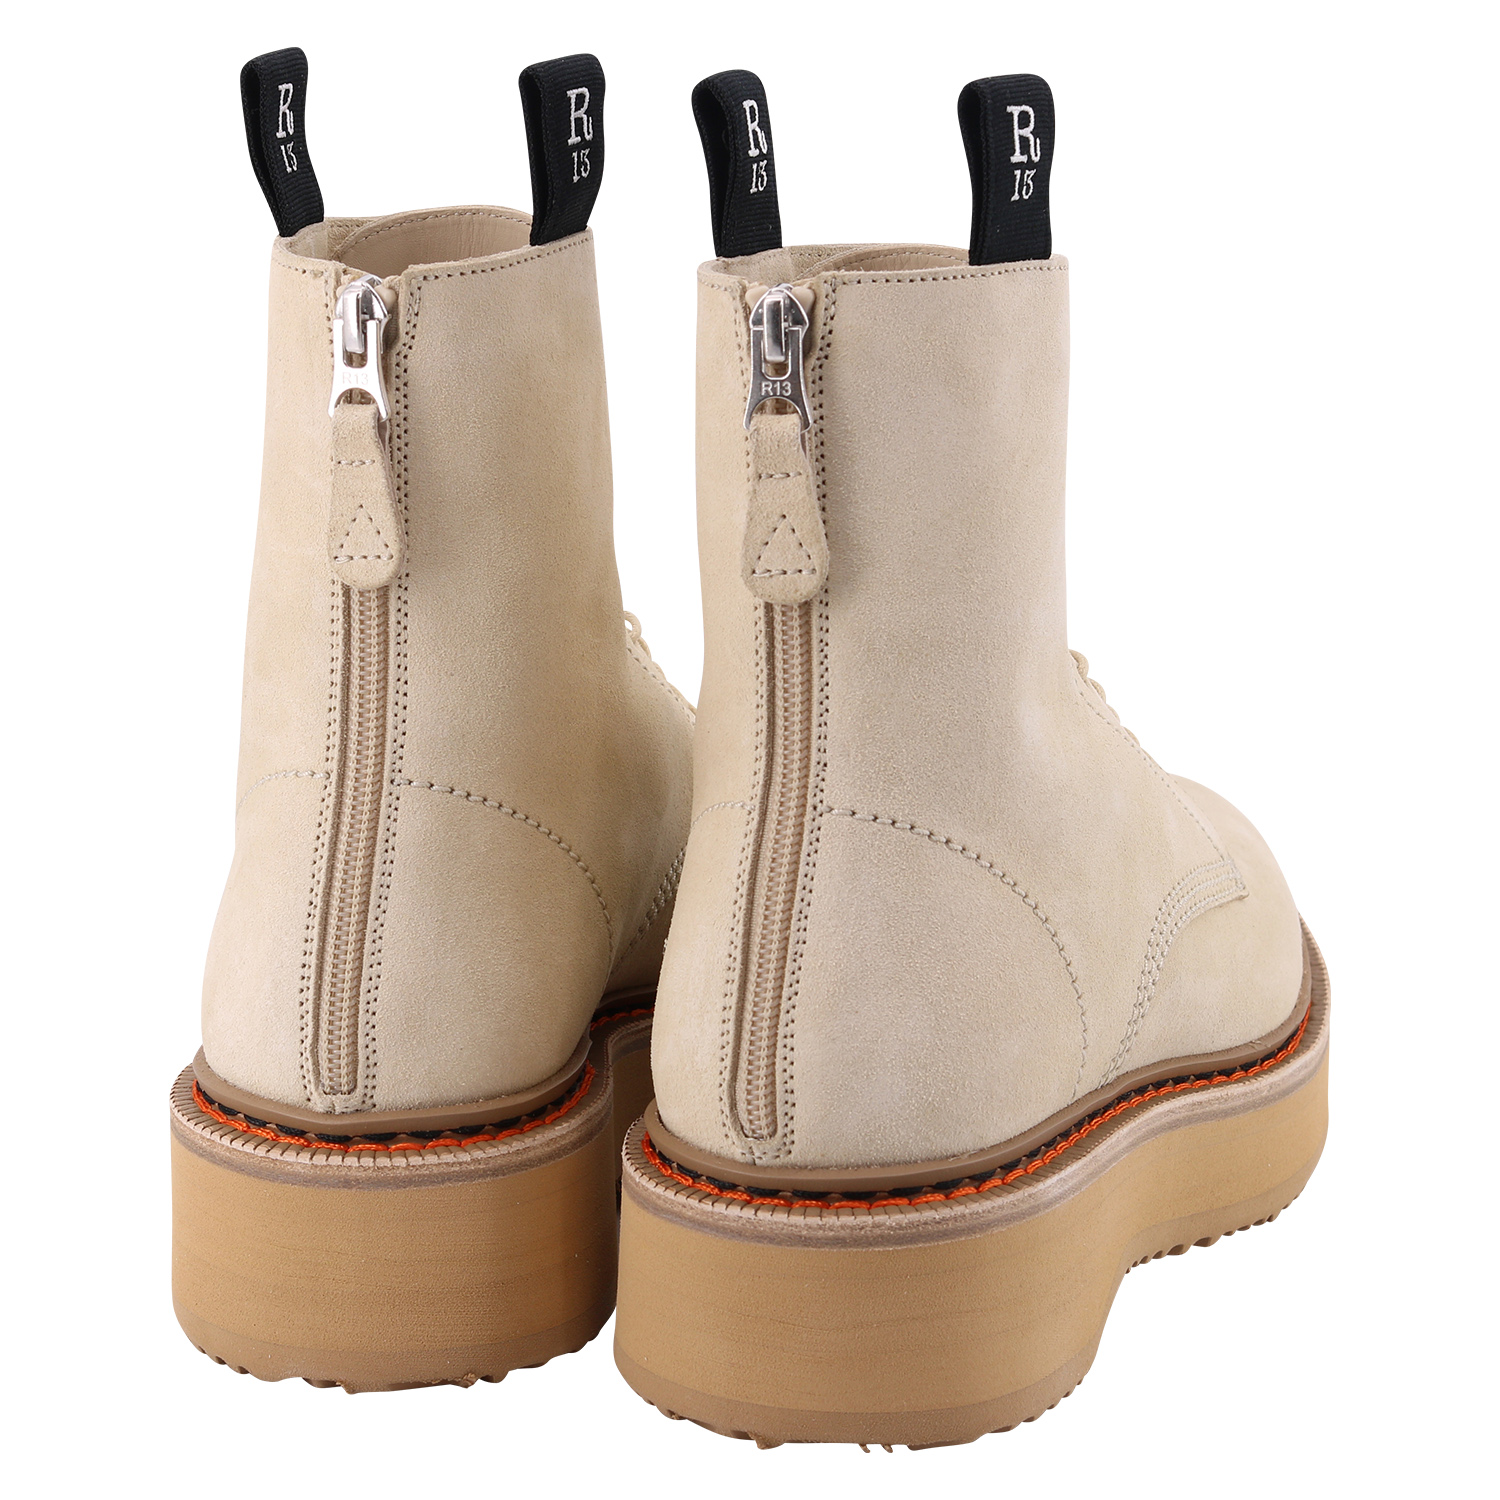 R13 Double Stack Suede Boots Tan